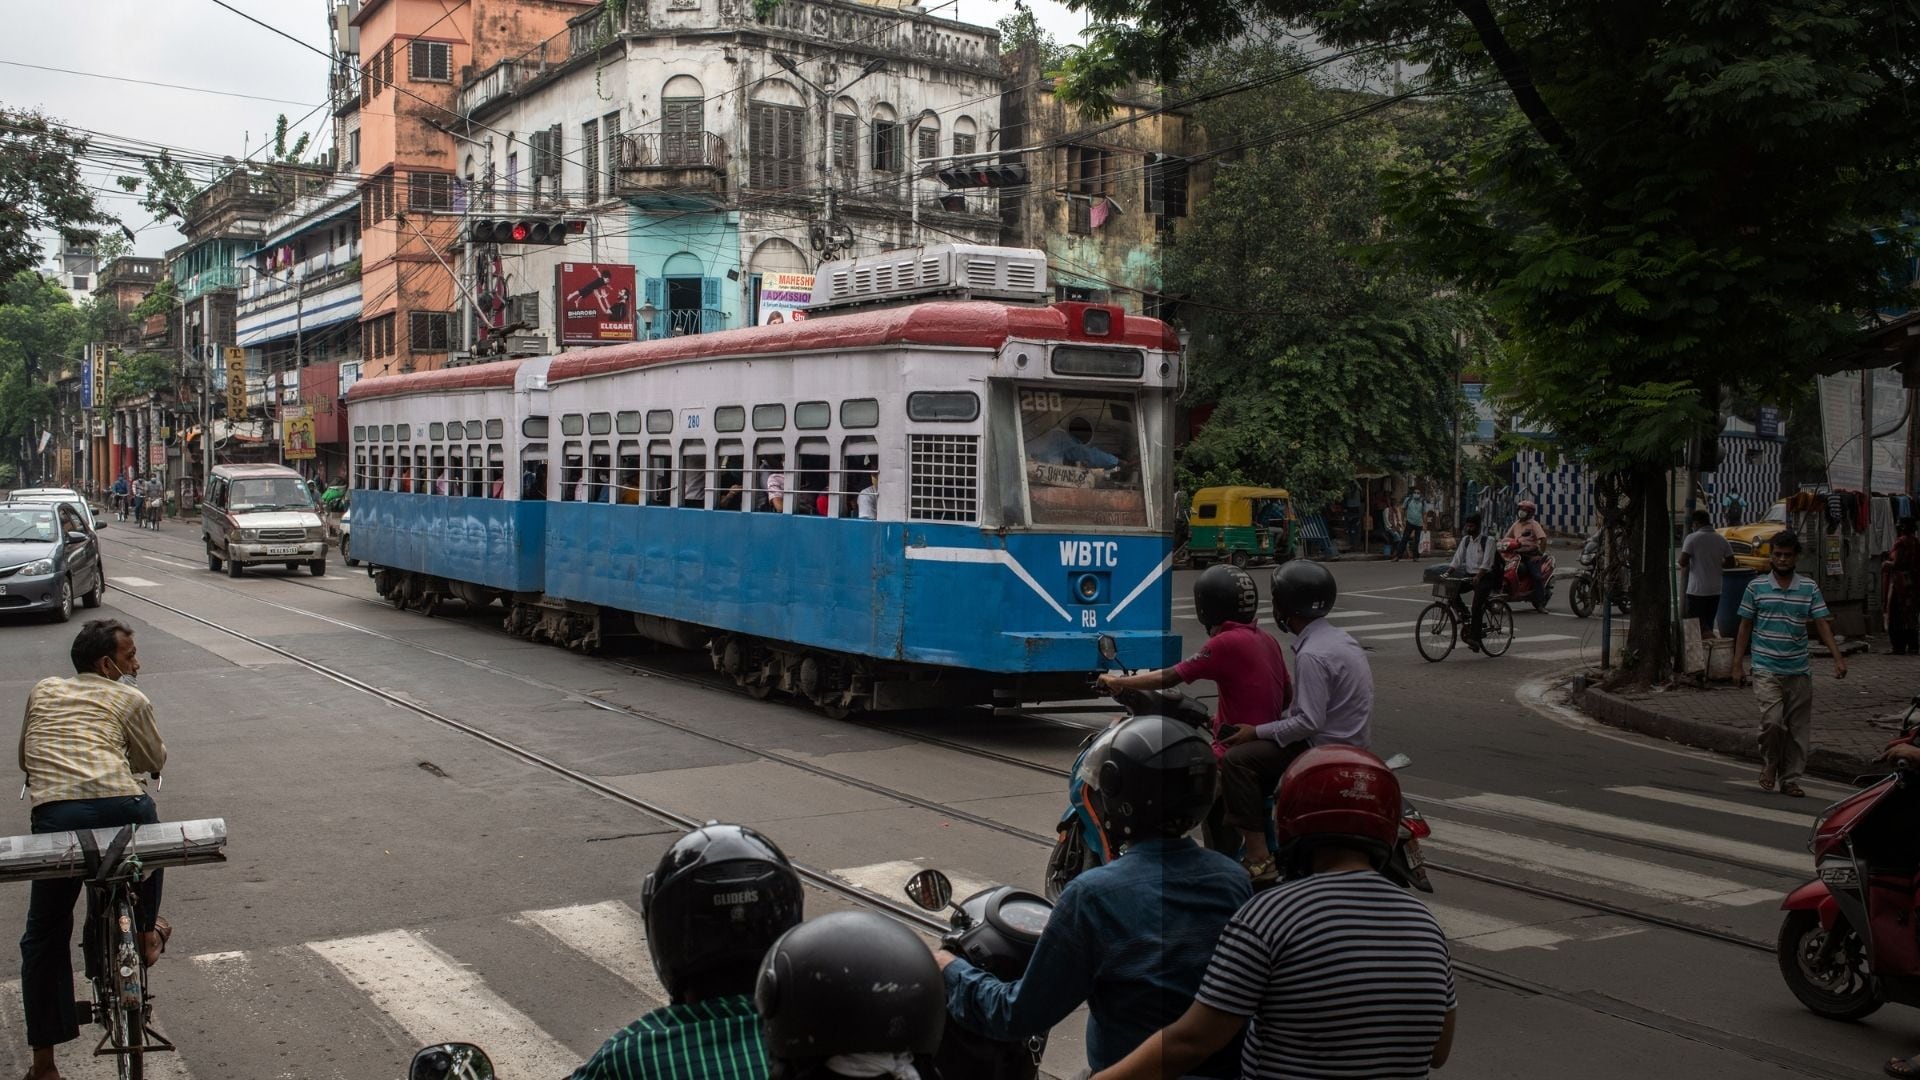 Trams, part of Kolkata heritage, are little more than a nostalgia ride today